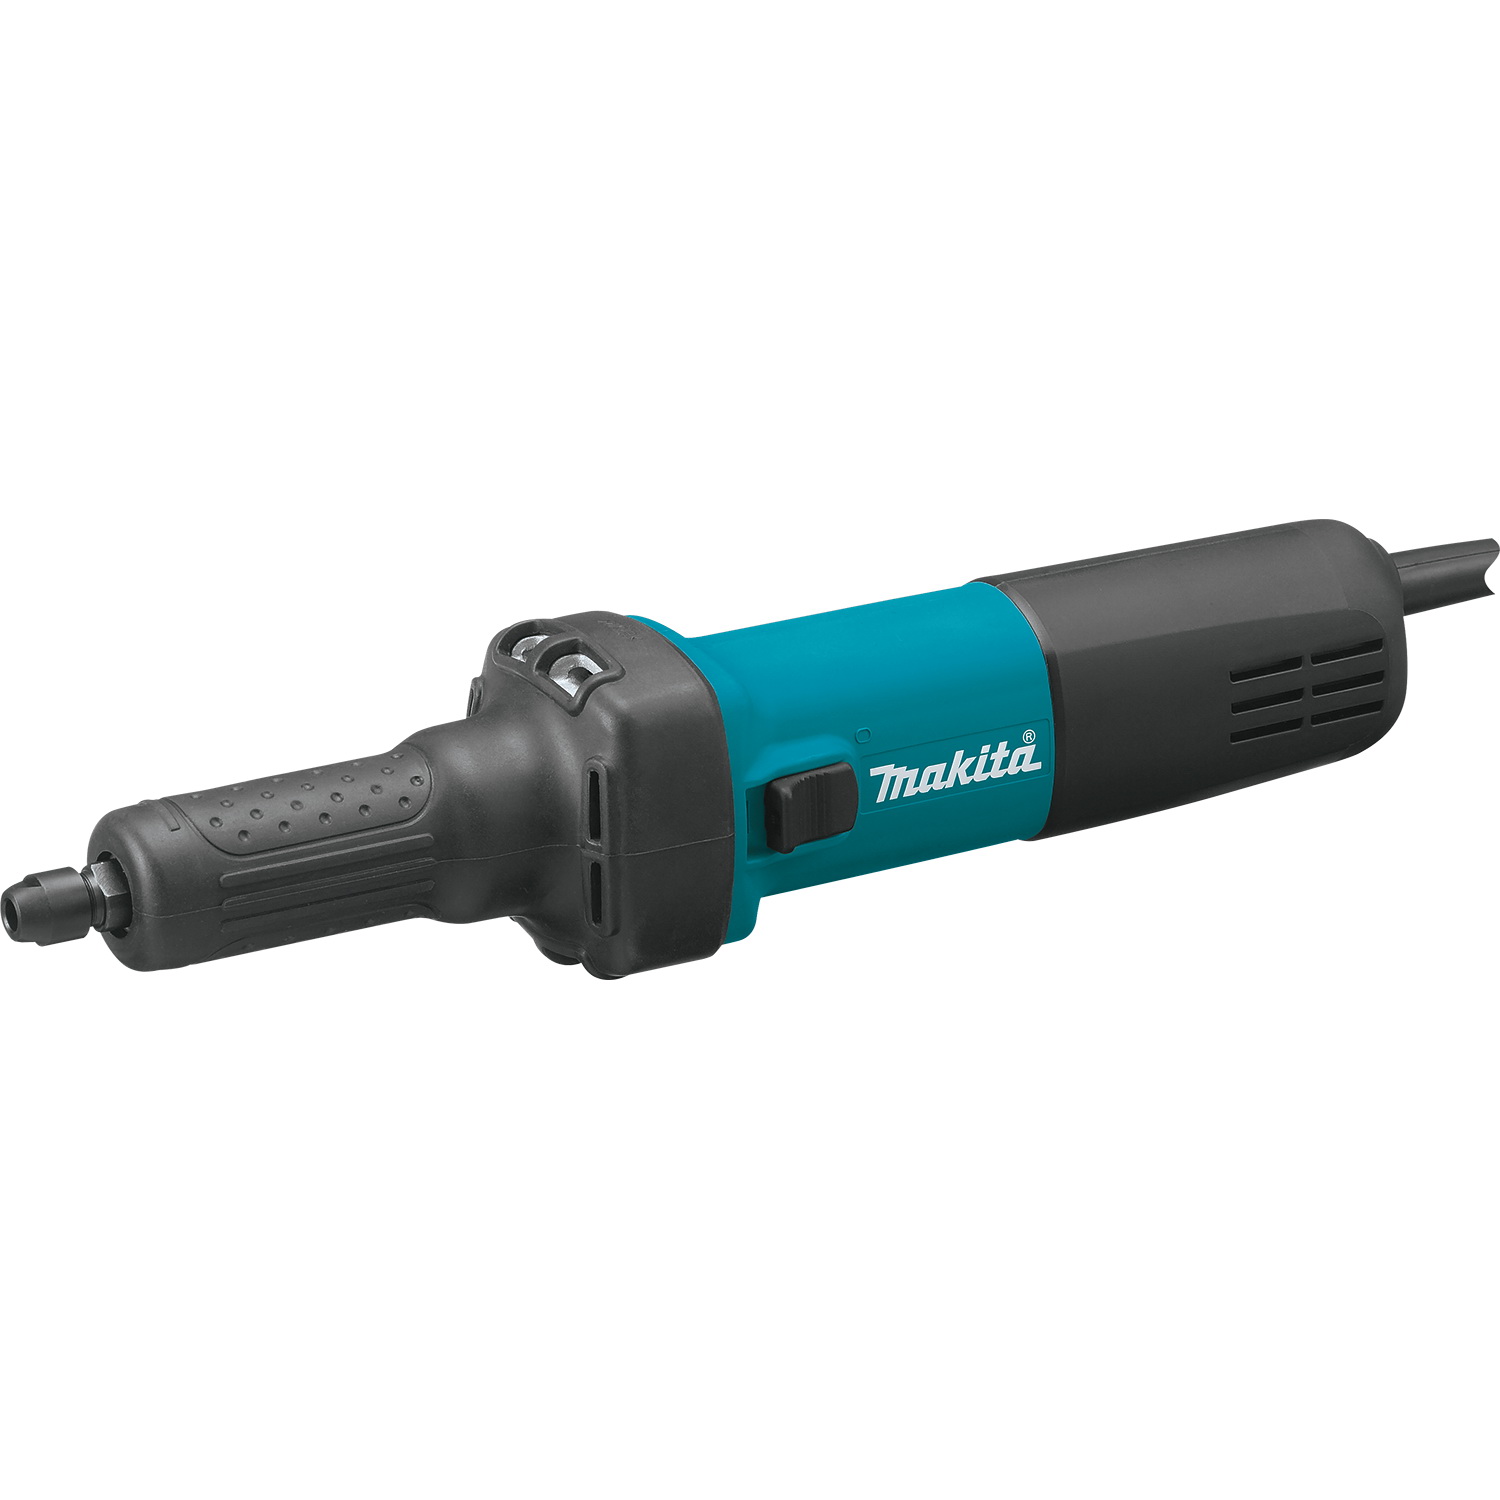 Makita GD0601 Corded Die Grinder with AC/DC Switch, 110 V, 3.5 A, 400 W, 1-1/2 in Dia Wheel, 25,000 rpm Speed - 1